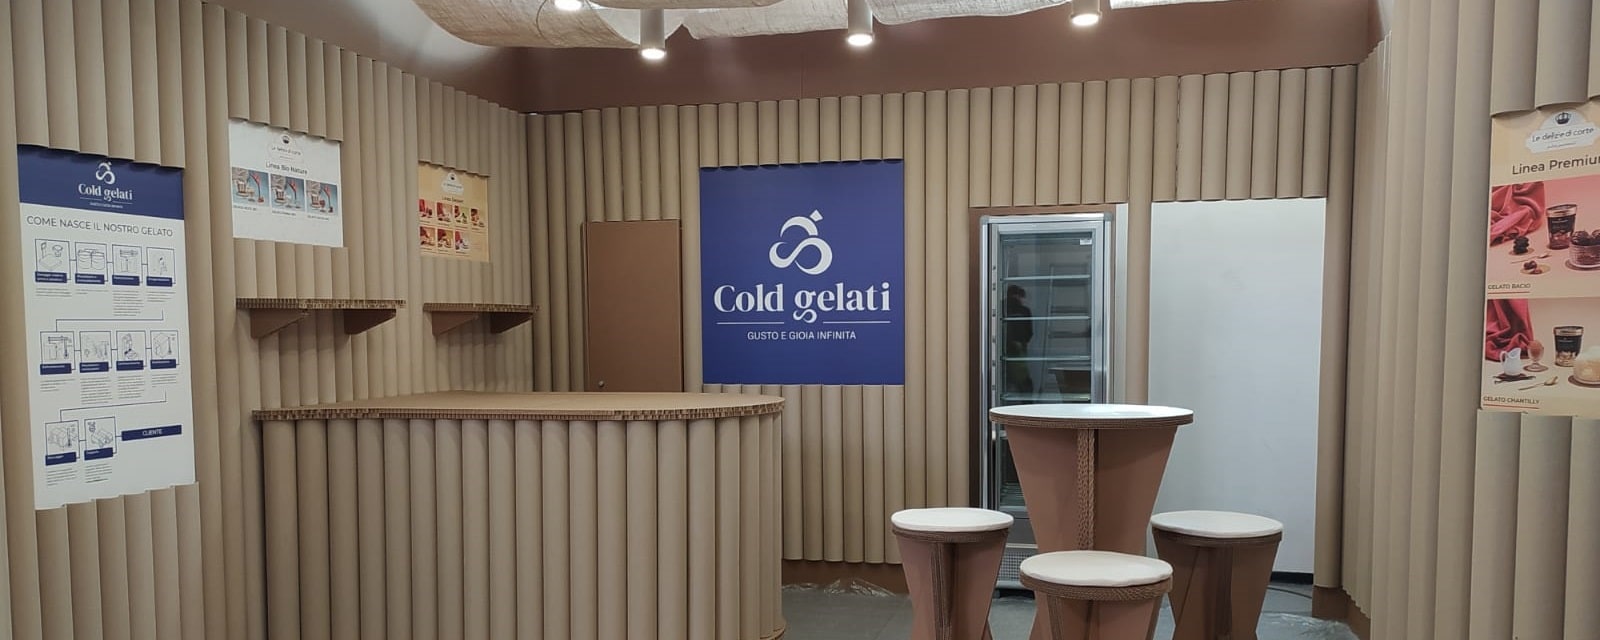 Customised trade show booth made with cardboard tubes